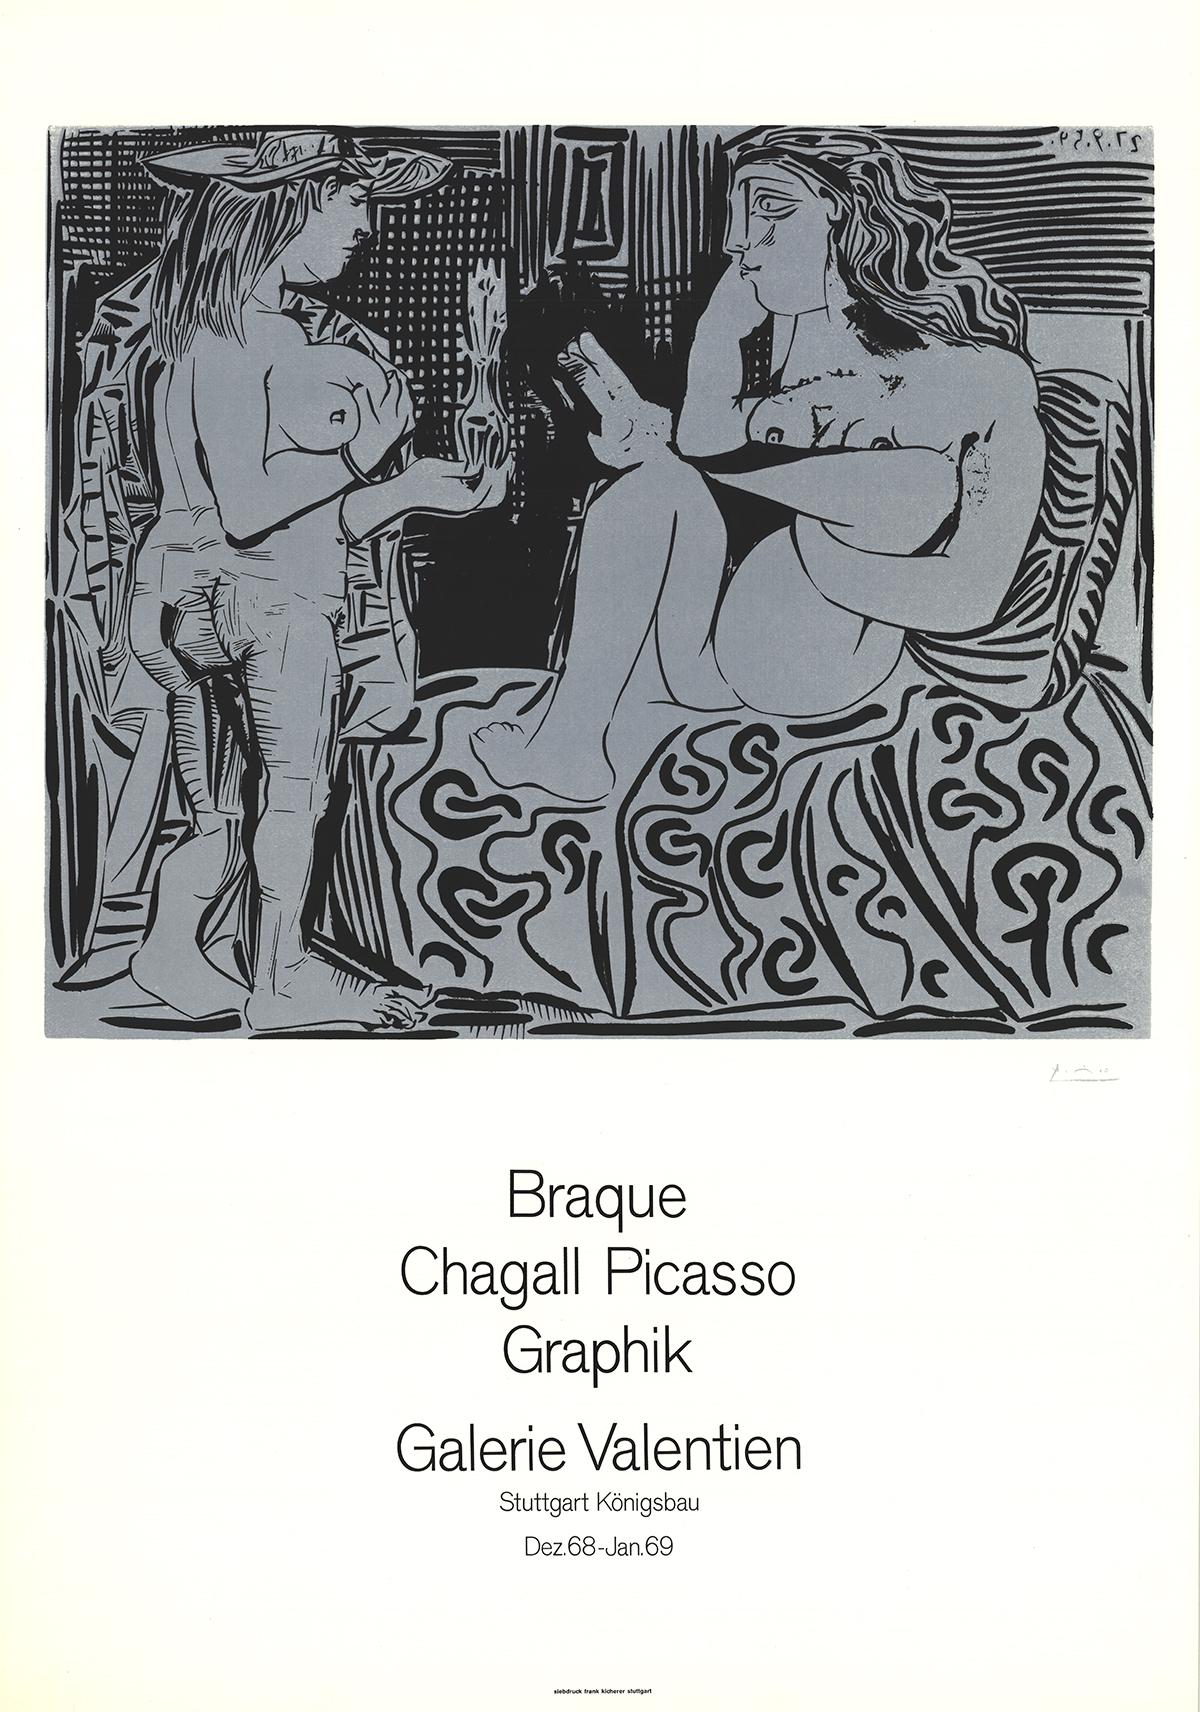 Galerie Valentien-Lithograph - Print by (after) Pablo Picasso